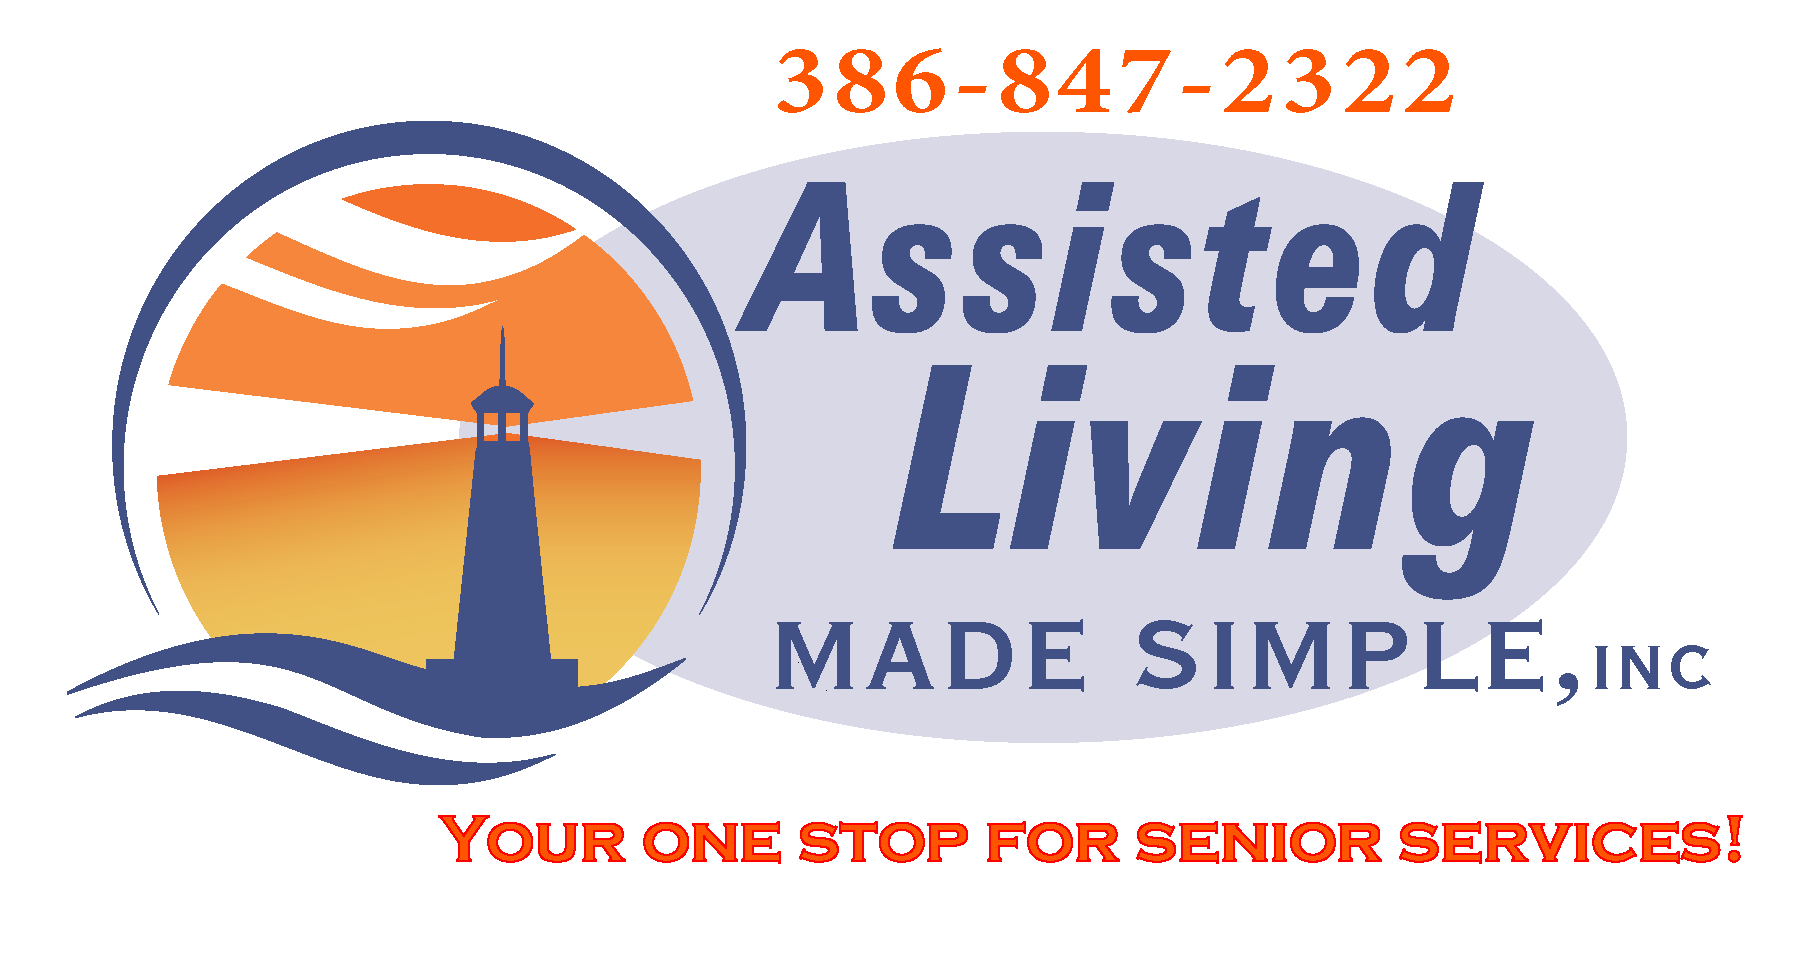 assisted living made simple